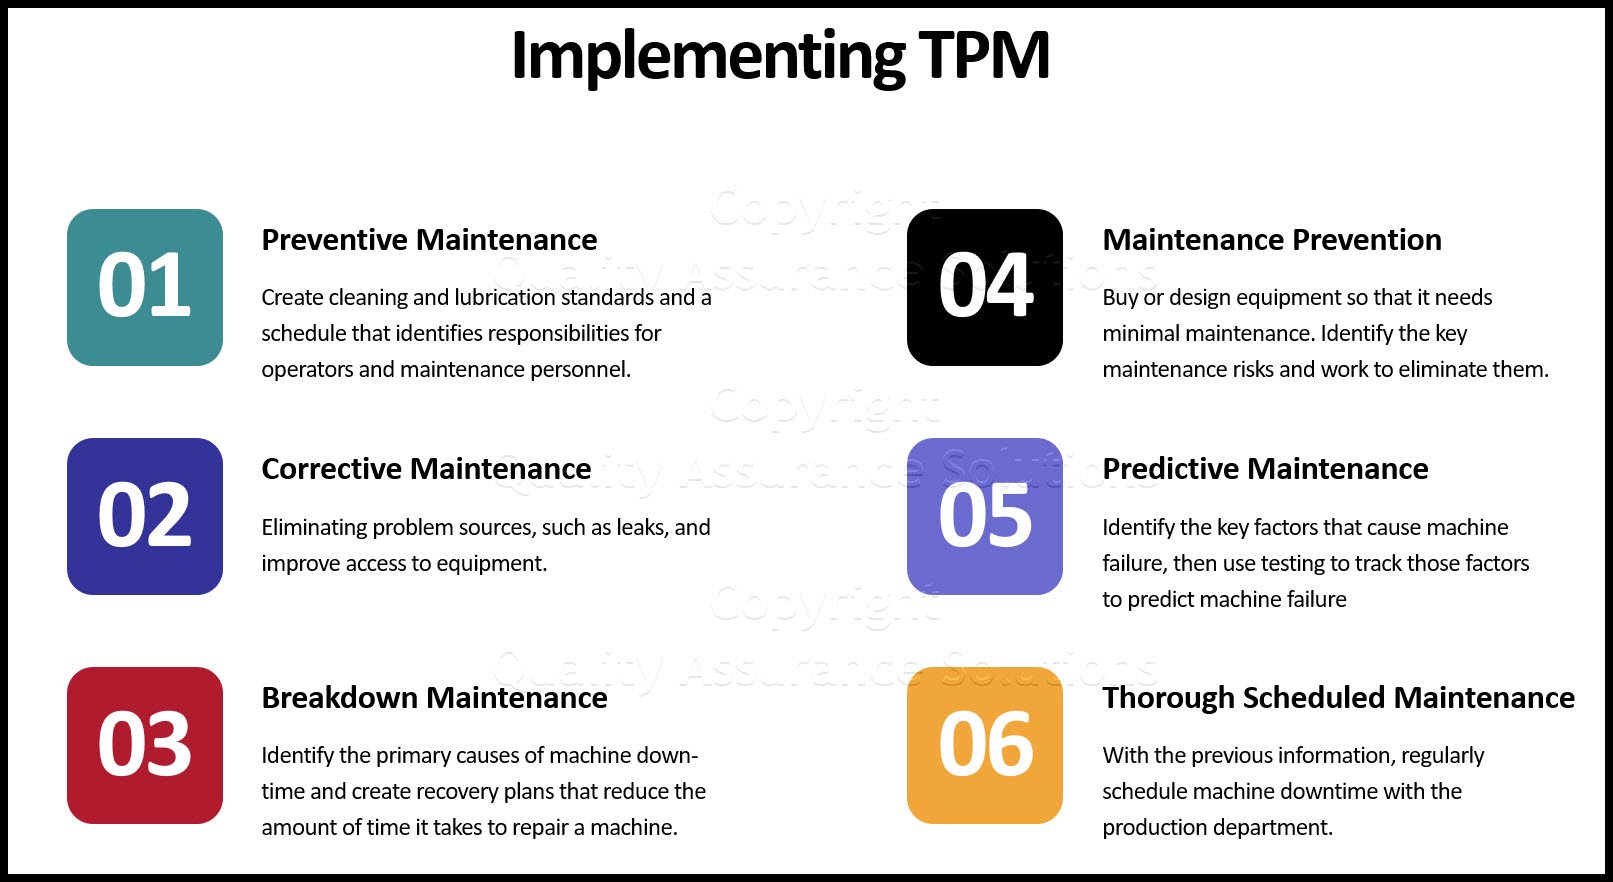 Total Productive Maintenance: Learn the implementation steps for full TPM at your facillity.